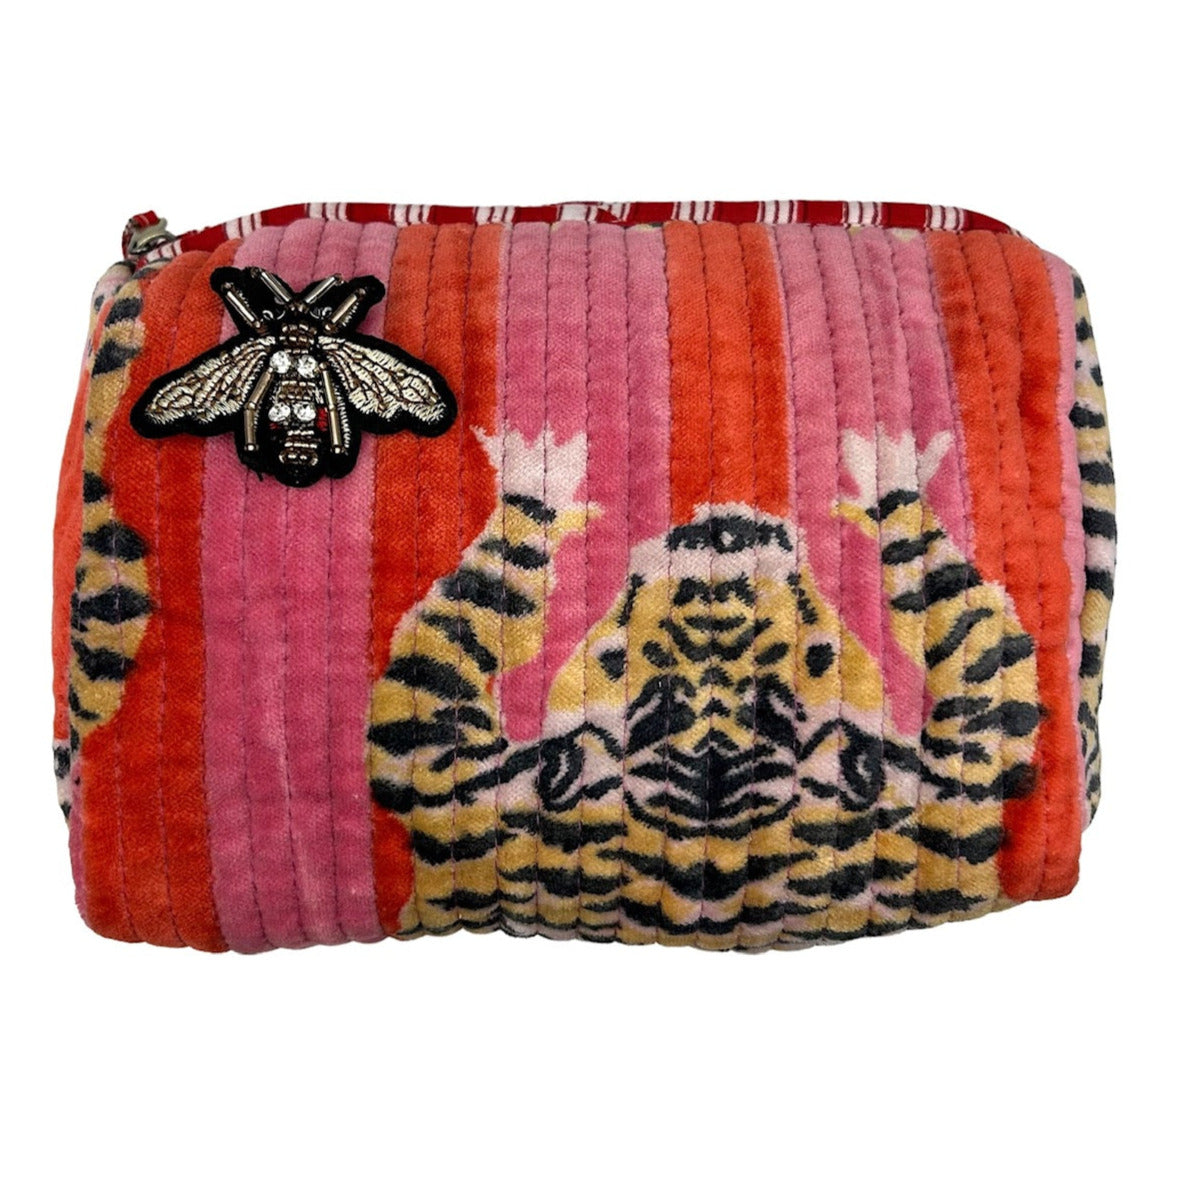 Madagascar velvet make-up bag in pink with embroidered brooch, large and small